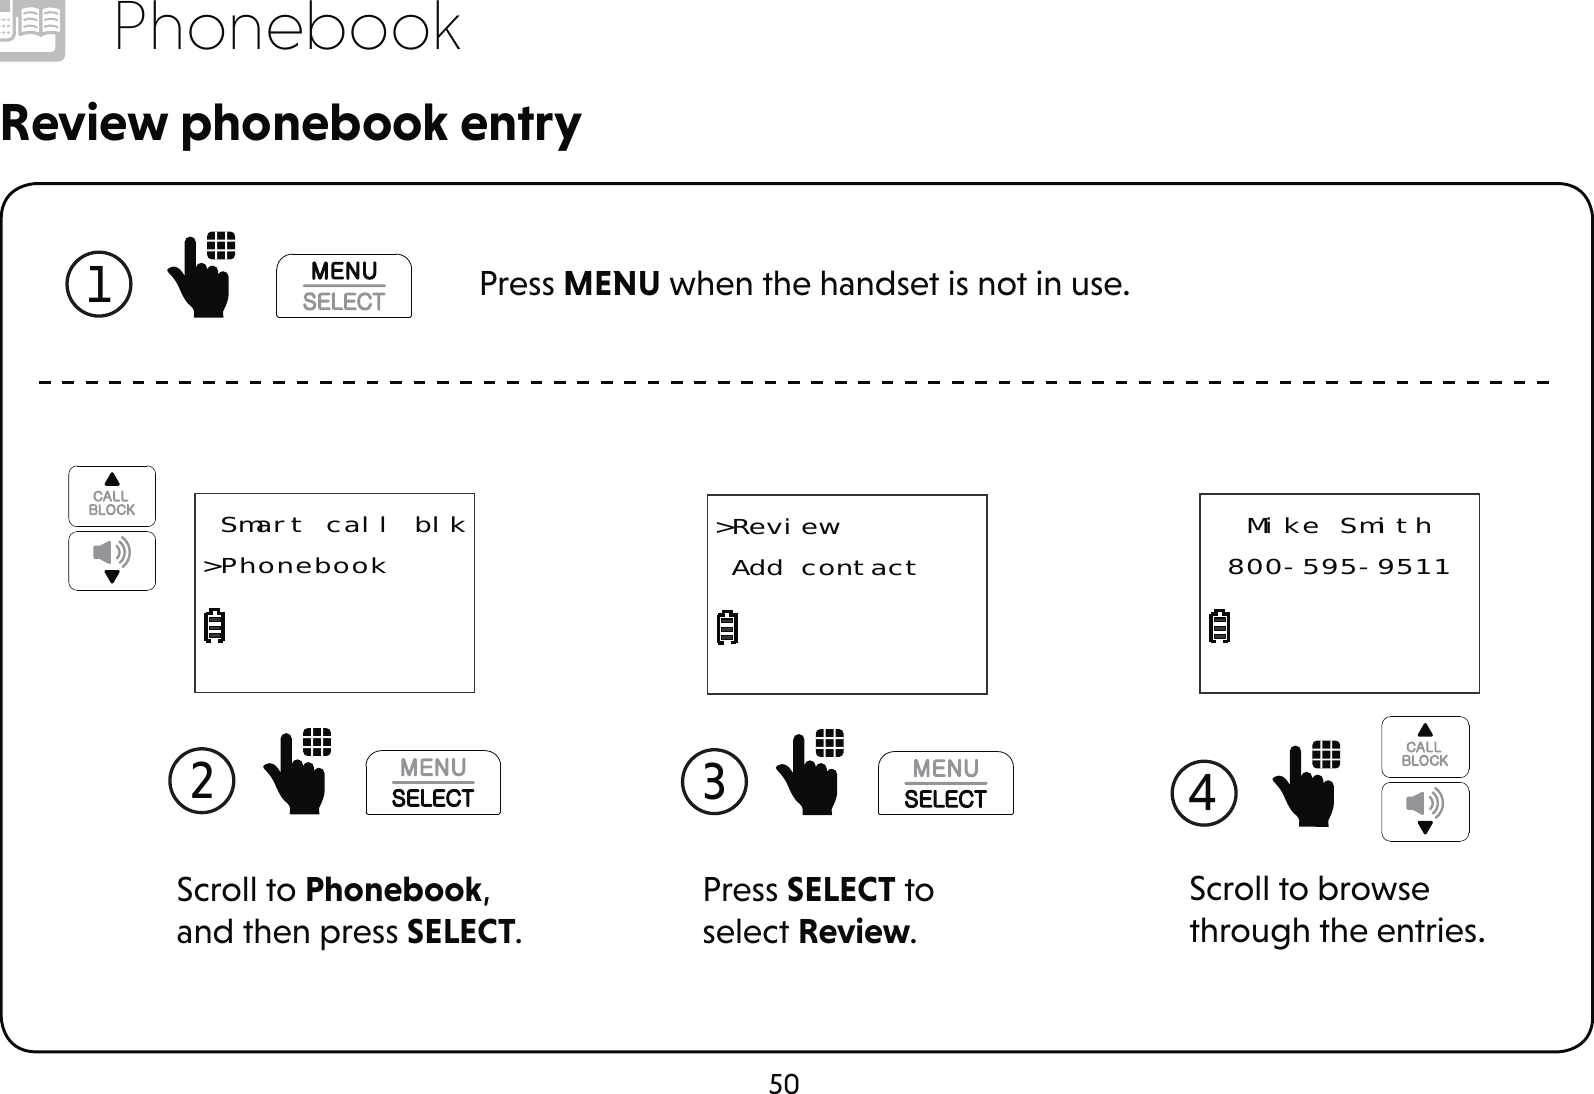 50PhonebookReview phonebook entry1  Press MENU when the handset is not in use.Scroll to Phonebook, and then press SELECT. Smart call blk&gt;Phonebook2 Press SELECT to select Review.&gt;Review Add contact3  4 Mike Smith800-595-9511Scroll to browse through the entries.